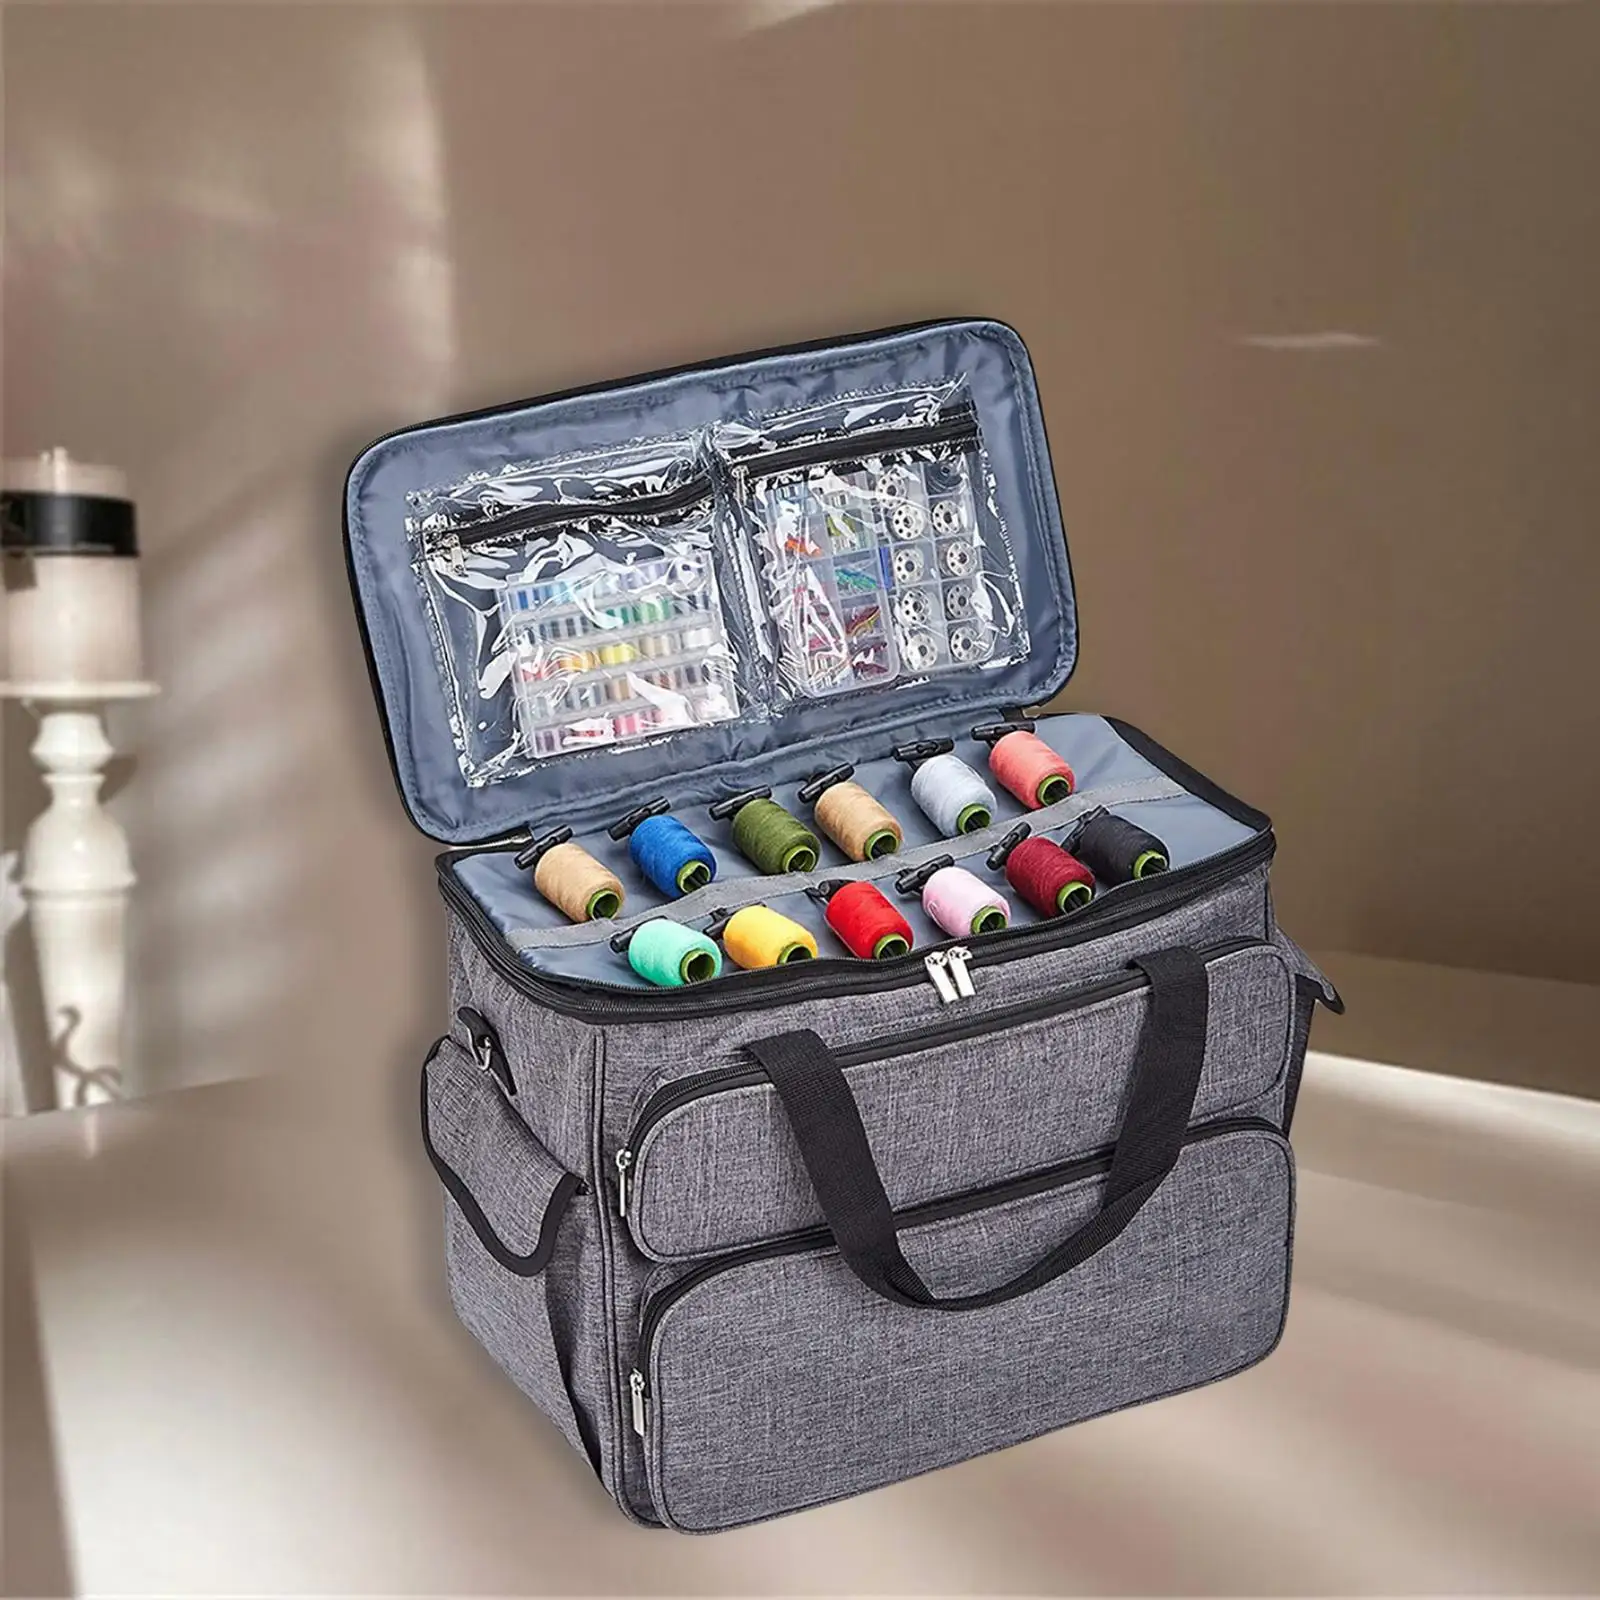 Protable Sewing Machine Carrying Case Handbag Tote Bag Sew Oxford Cloth Home